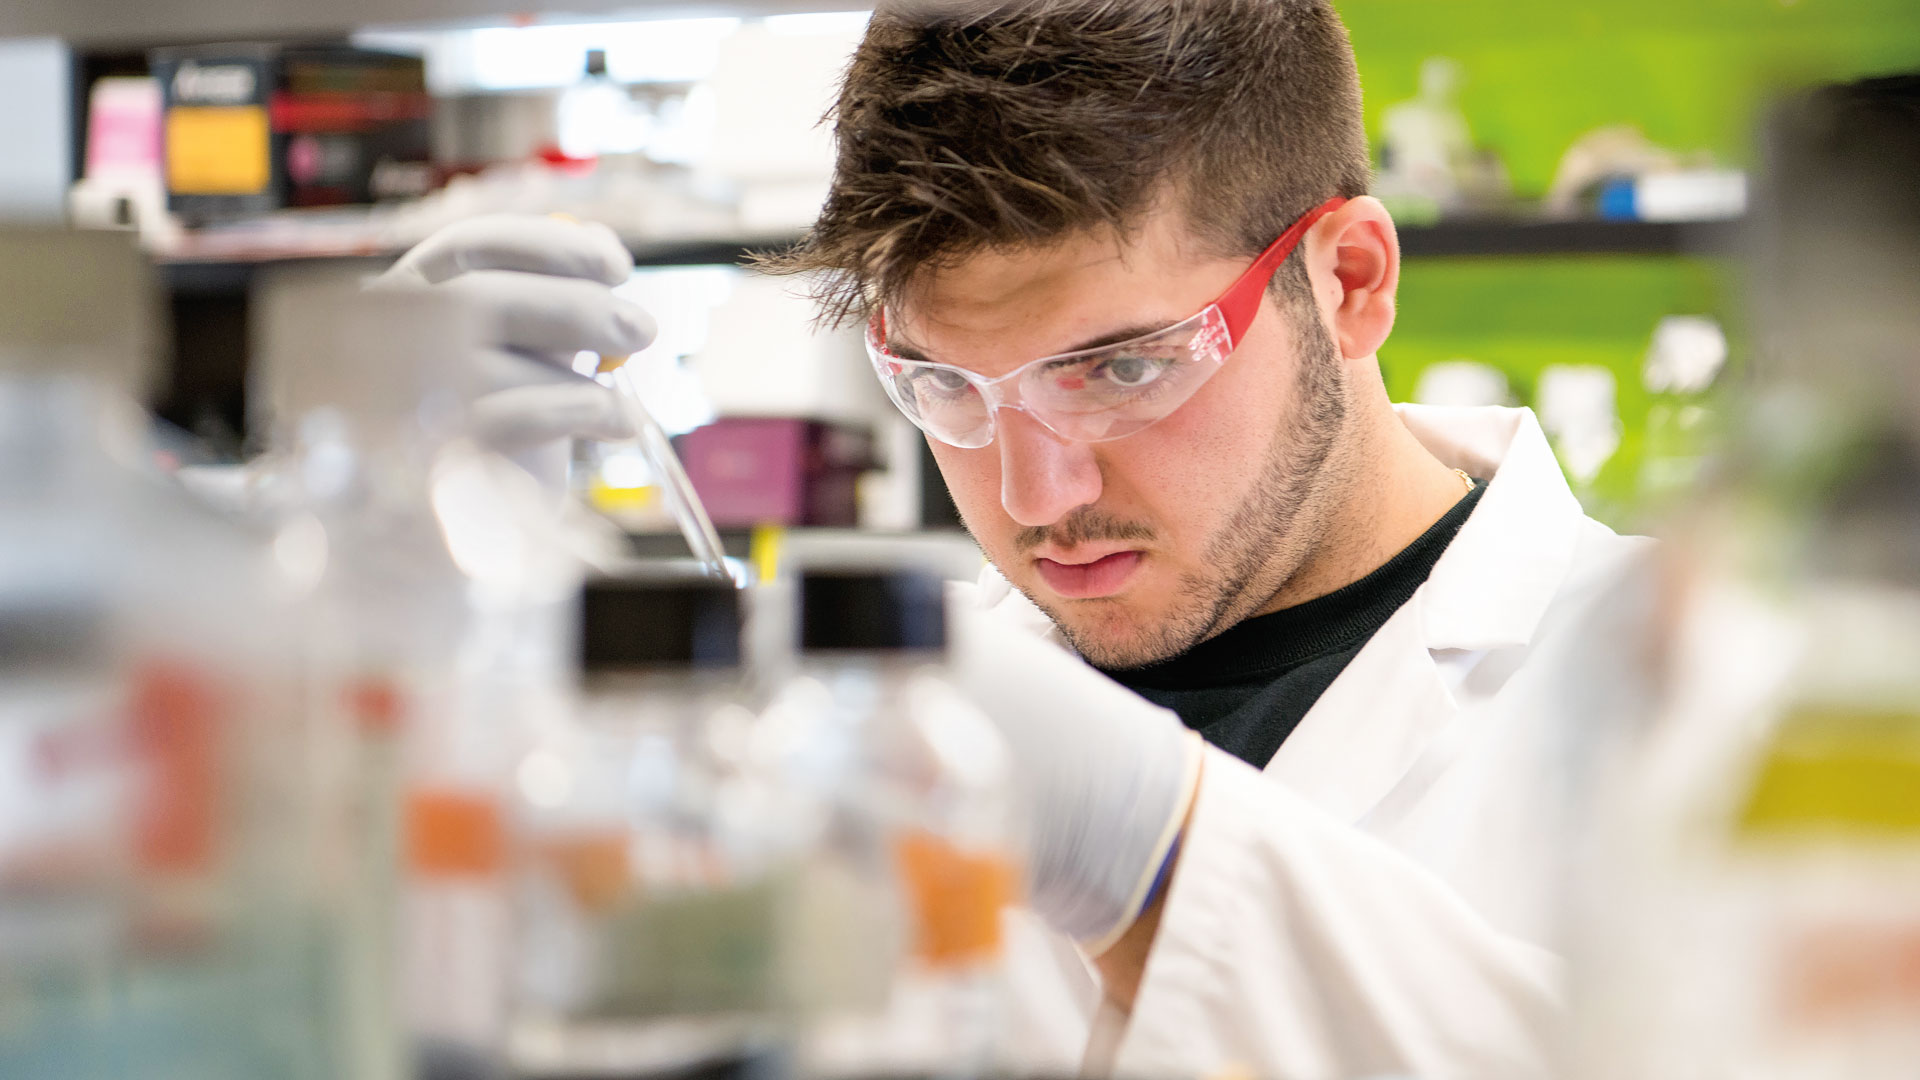 Student concentrating in the lab